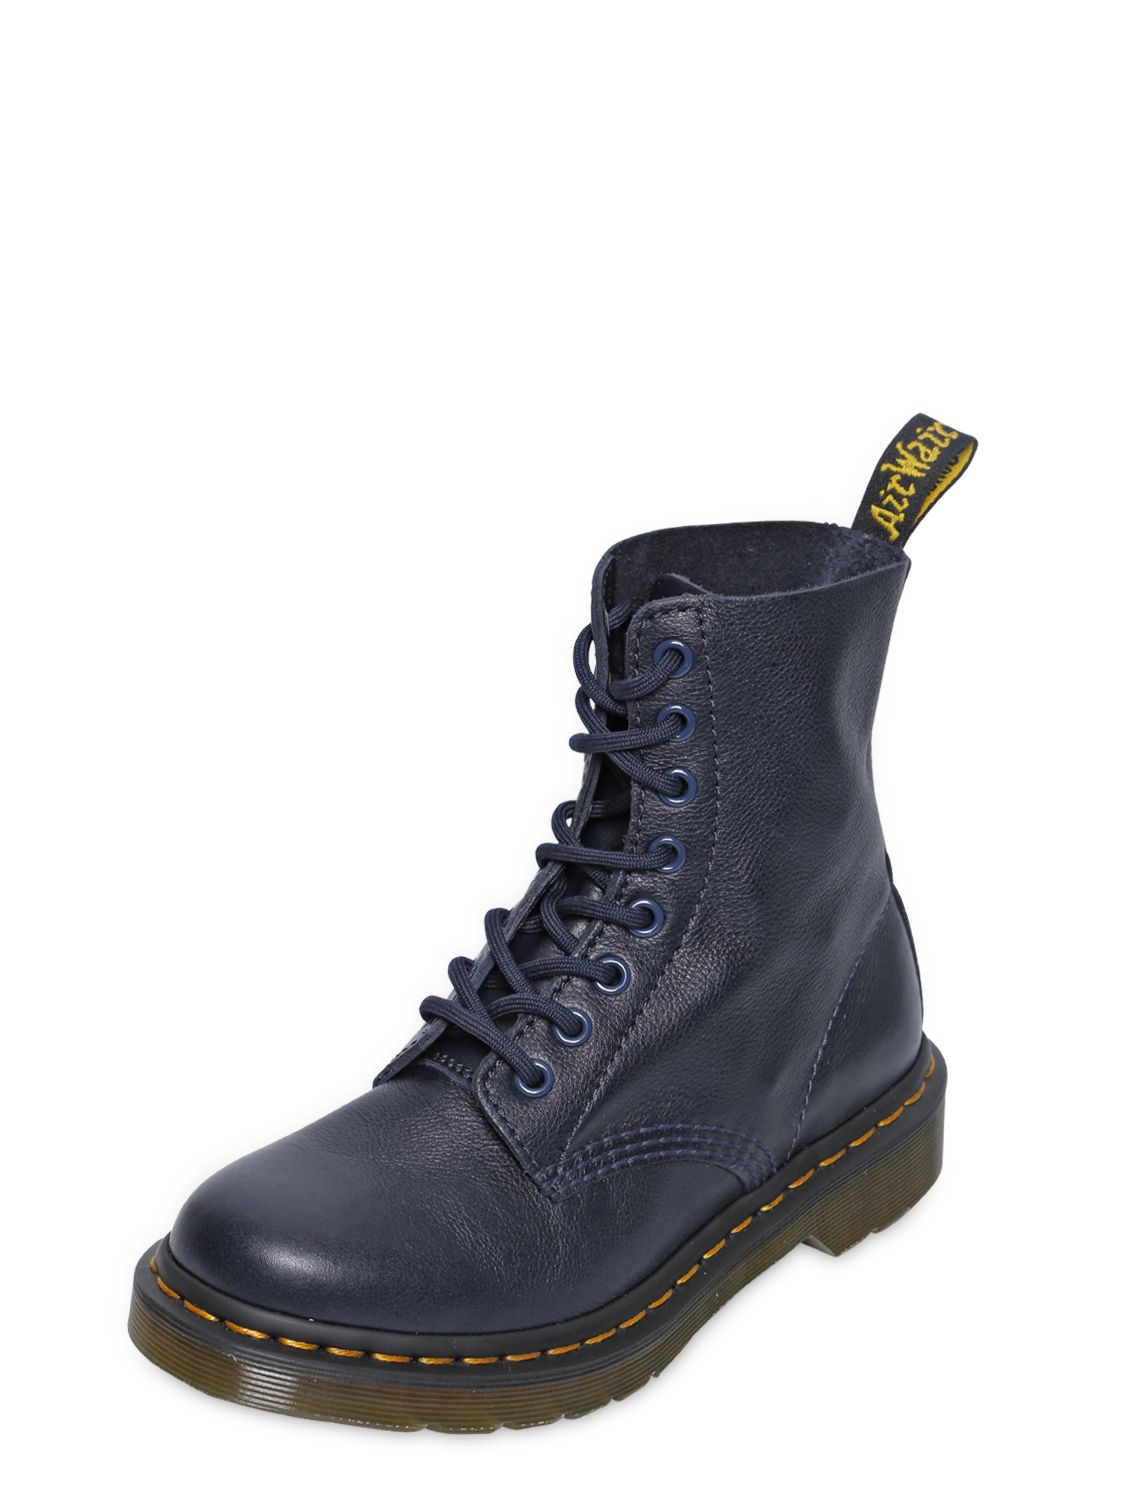 soft leather dr martens boots